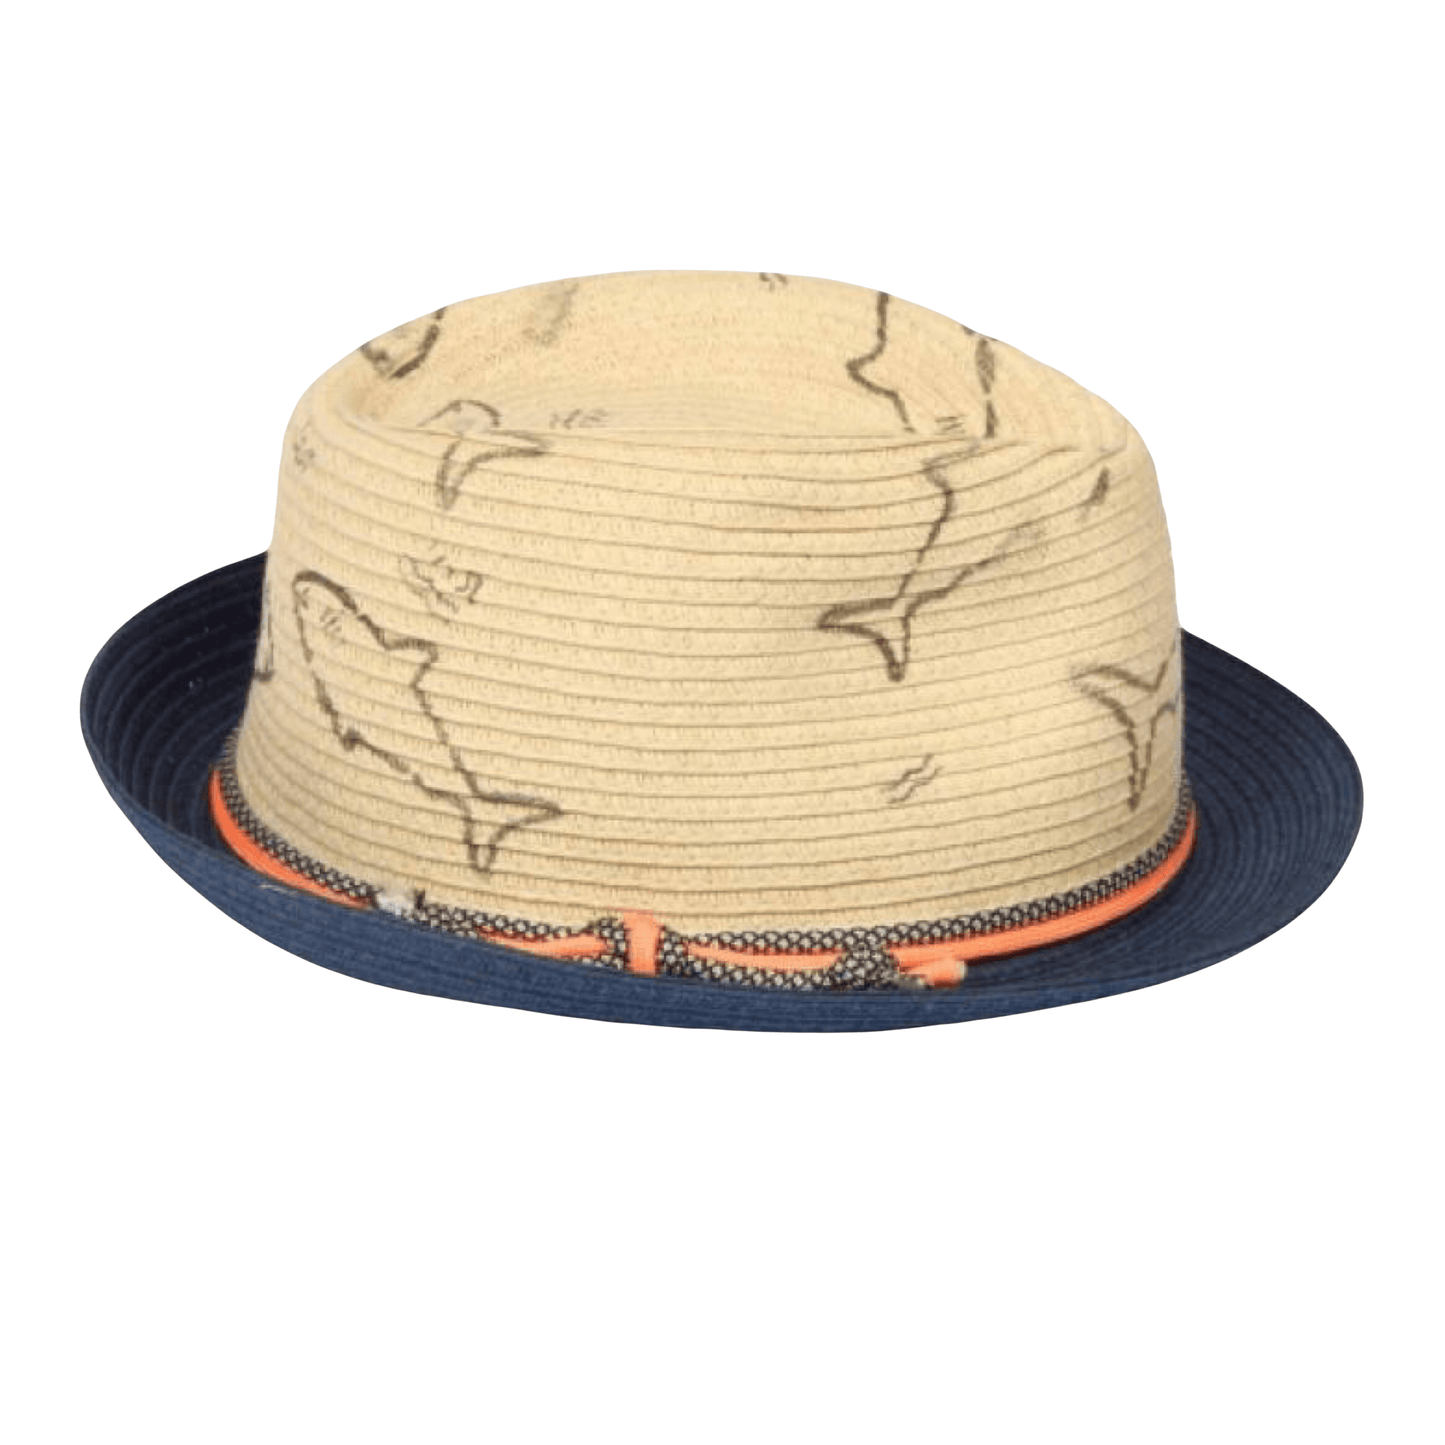 Shark Print Trilby | Oscar & Me | Baby & Children’s Clothing & Accessories